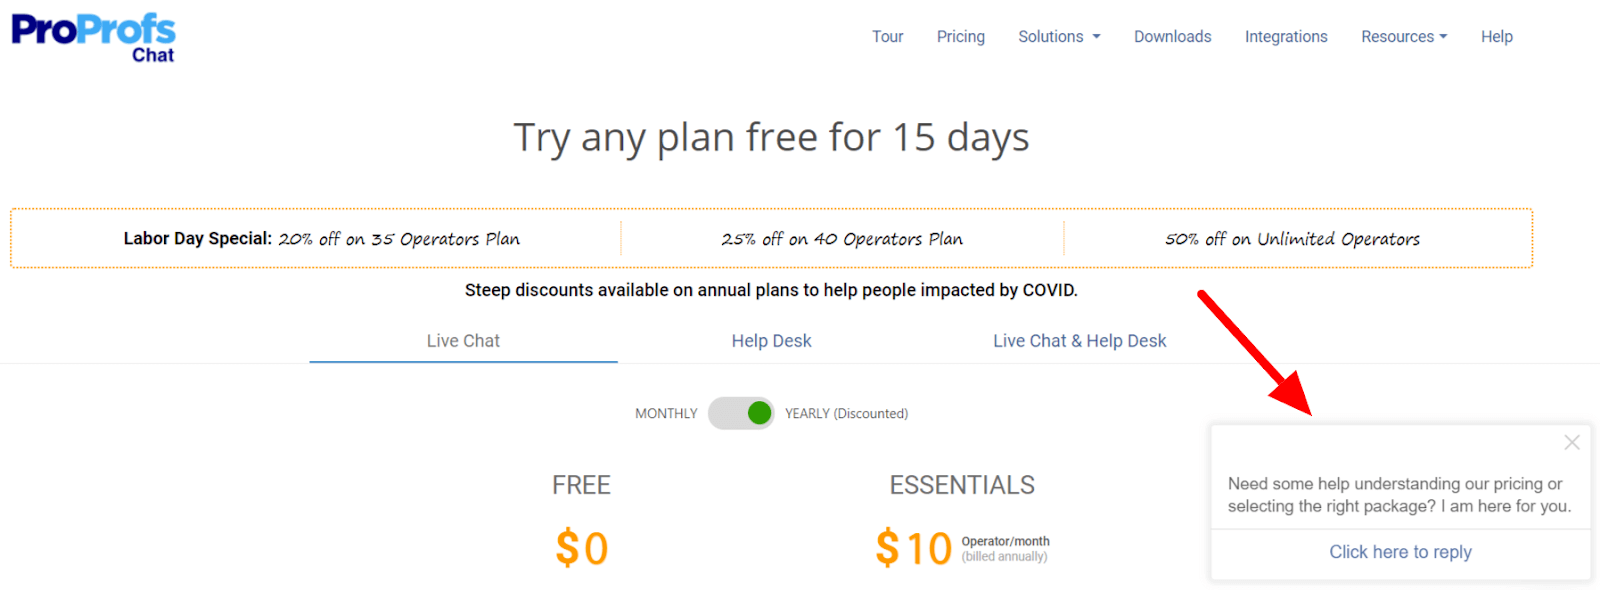 live chat pricing page help